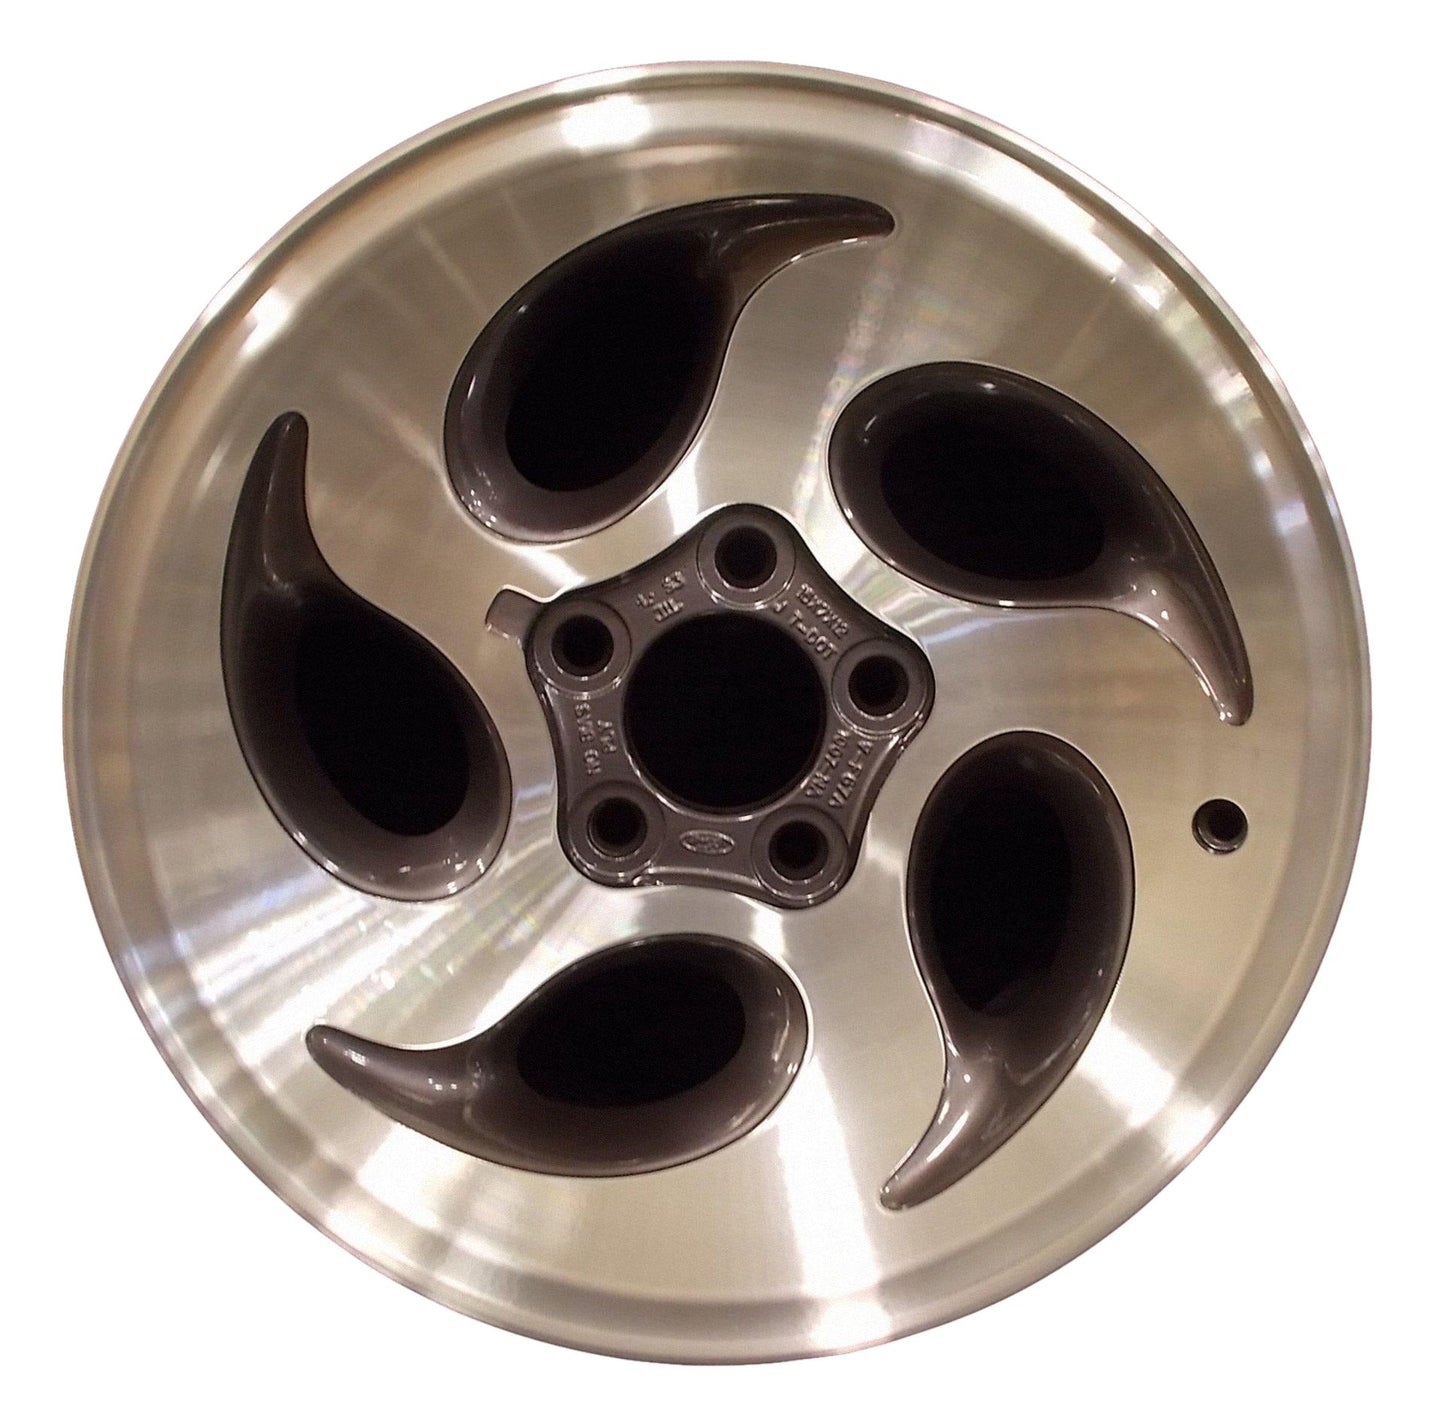 Ford Explorer  1995, 1996, 1997, 1998, 1999, 2000, 2001 Factory OEM Car Wheel Size 15x7 Alloy WAO.3137.LC49.MA